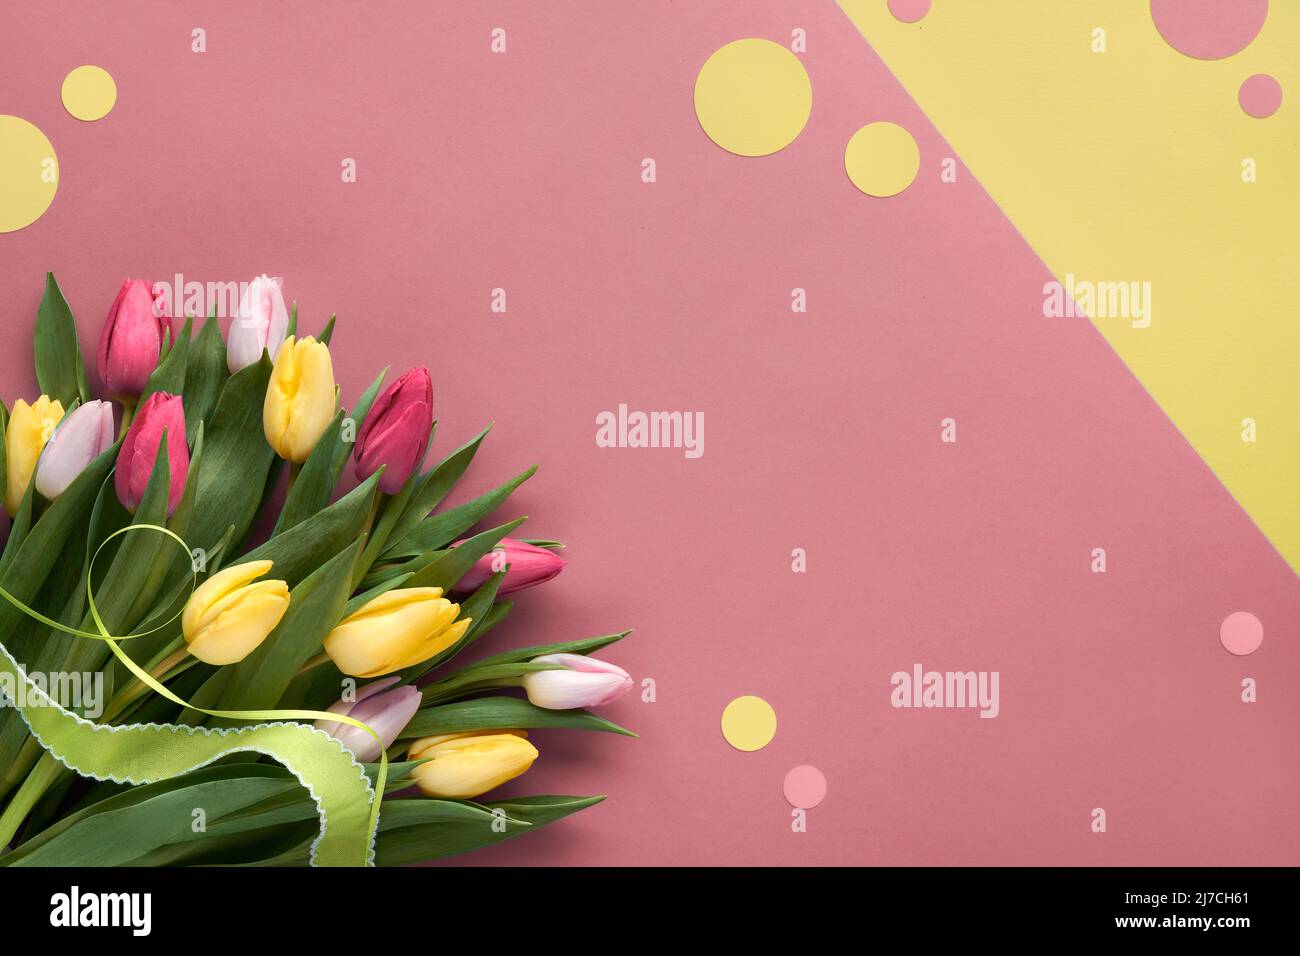 Bunch of red and yellow tulips with ribbon. Corner composition, flat lay on layered pink and yellow paper. Stock Photo